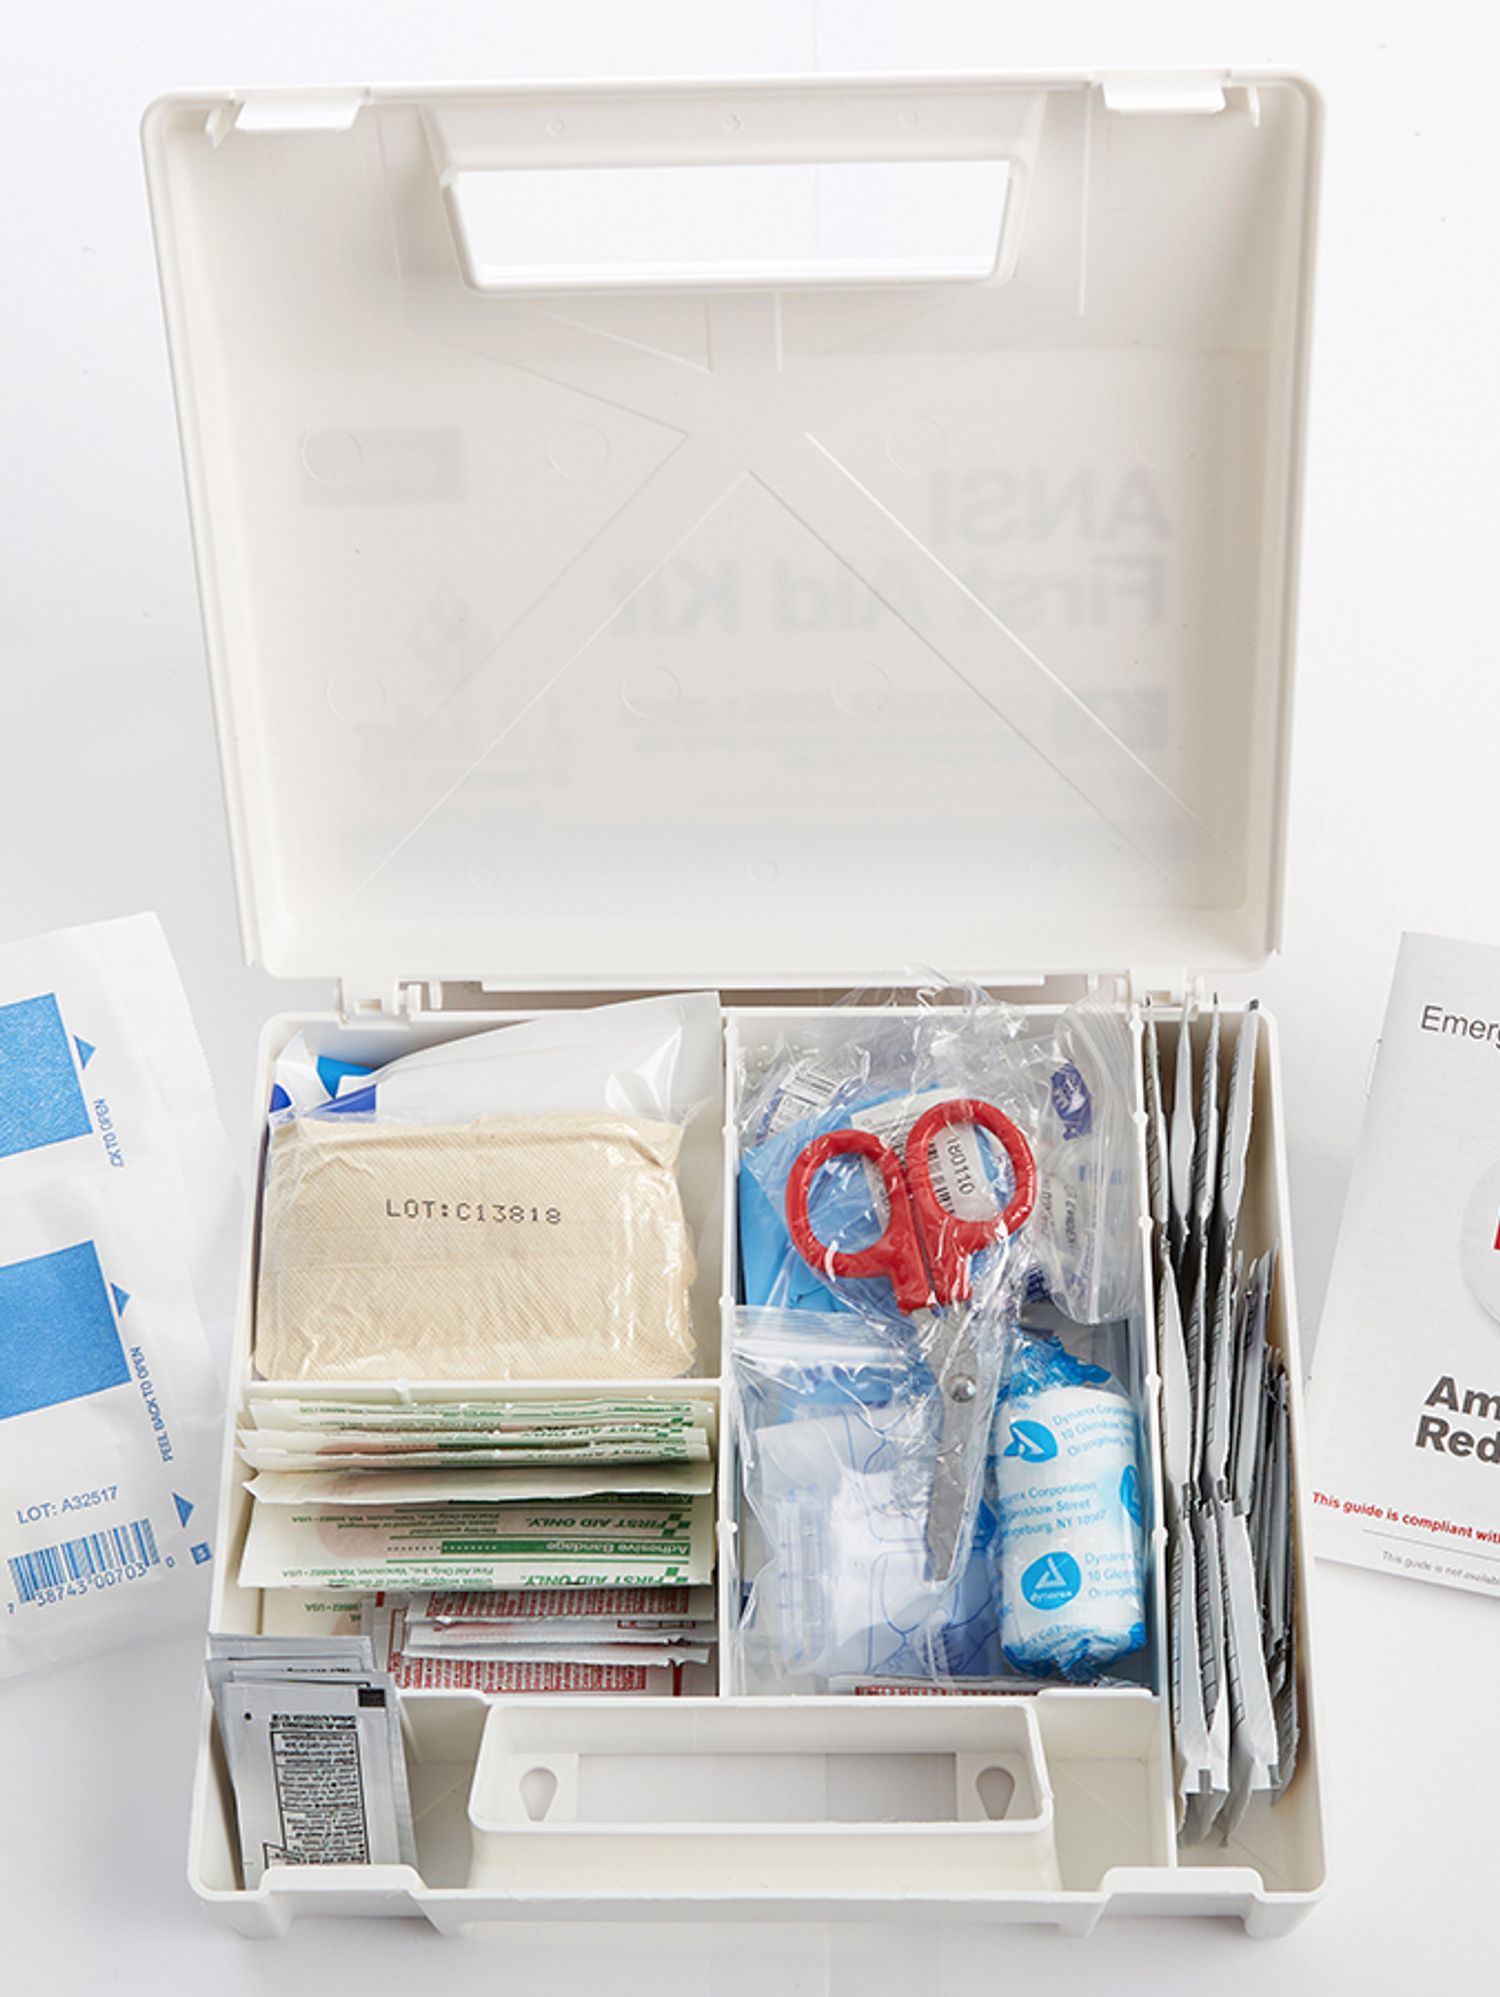 What's actually required in my first aid kit?